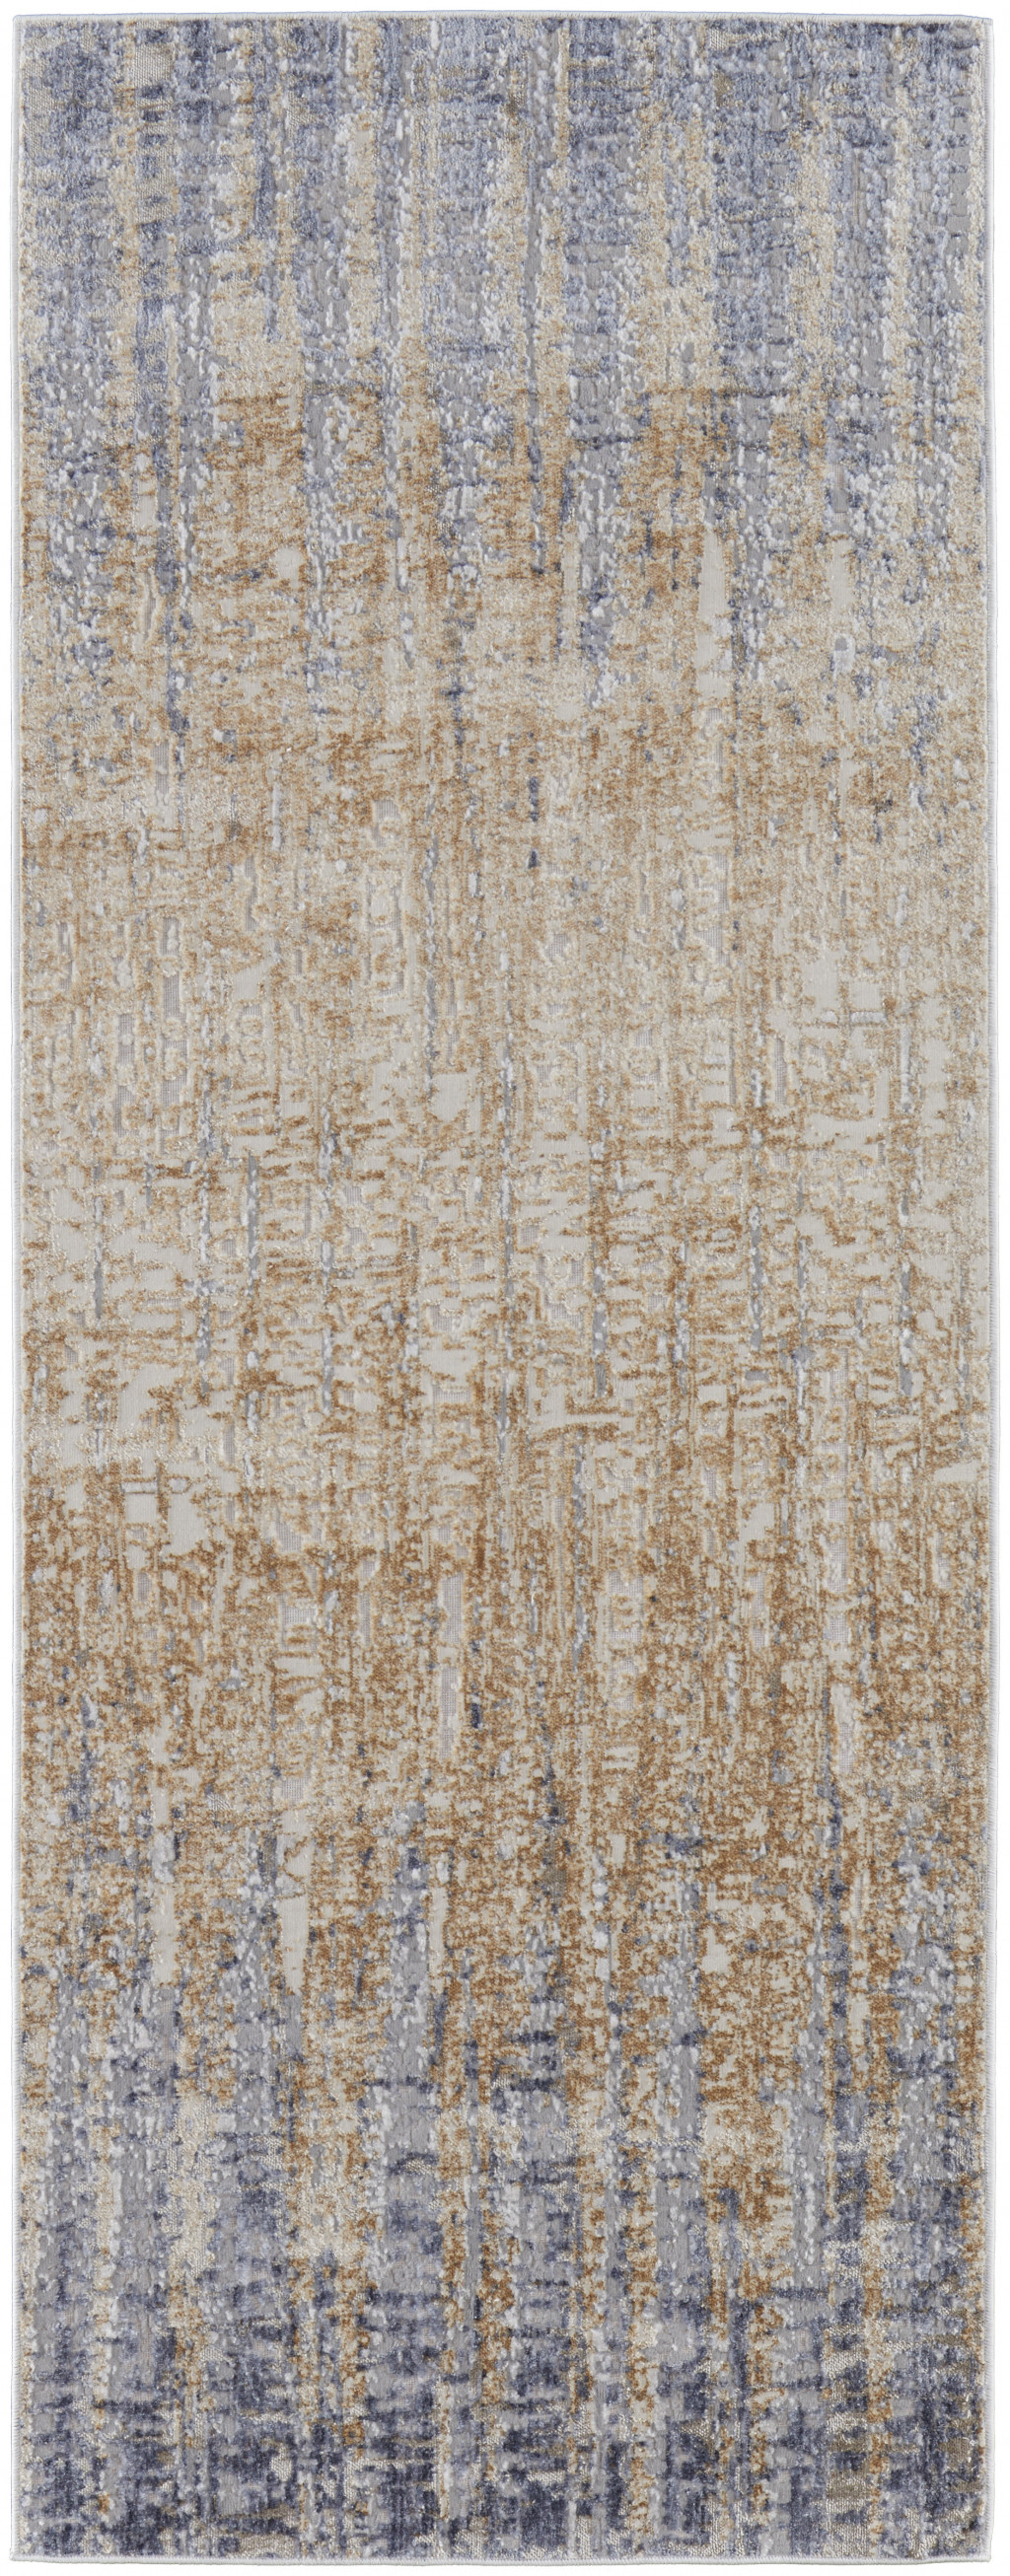 10' Tan Brown And Blue Abstract Power Loom Distressed Runner Rug-514189-1